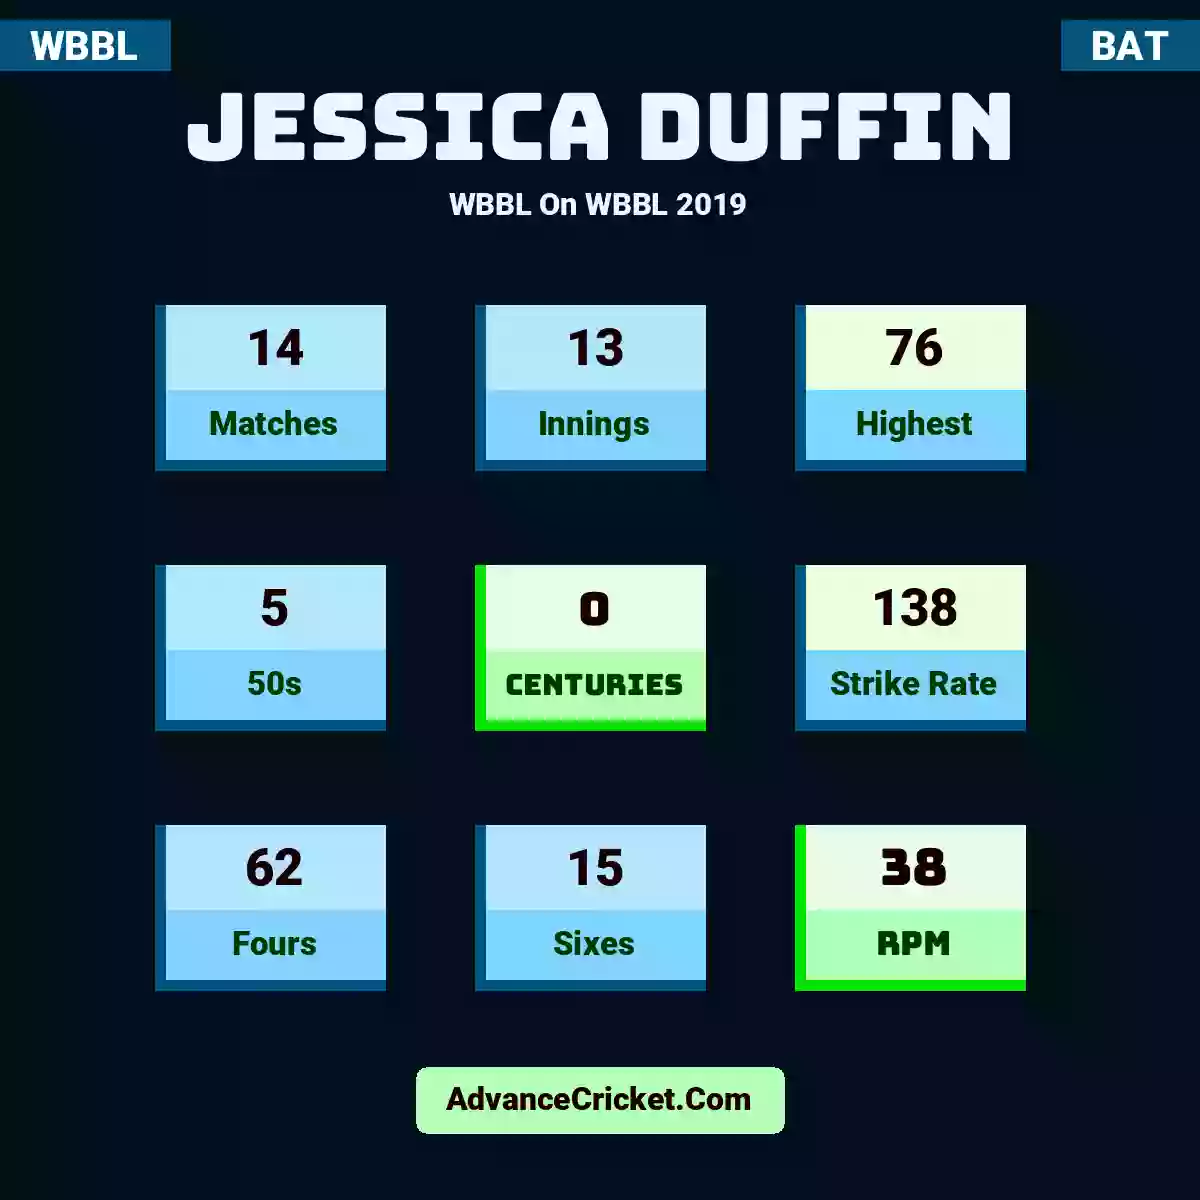 Jessica Duffin WBBL  On WBBL 2019, Jessica Duffin played 14 matches, scored 76 runs as highest, 5 half-centuries, and 0 centuries, with a strike rate of 138. J.Duffin hit 62 fours and 15 sixes, with an RPM of 38.